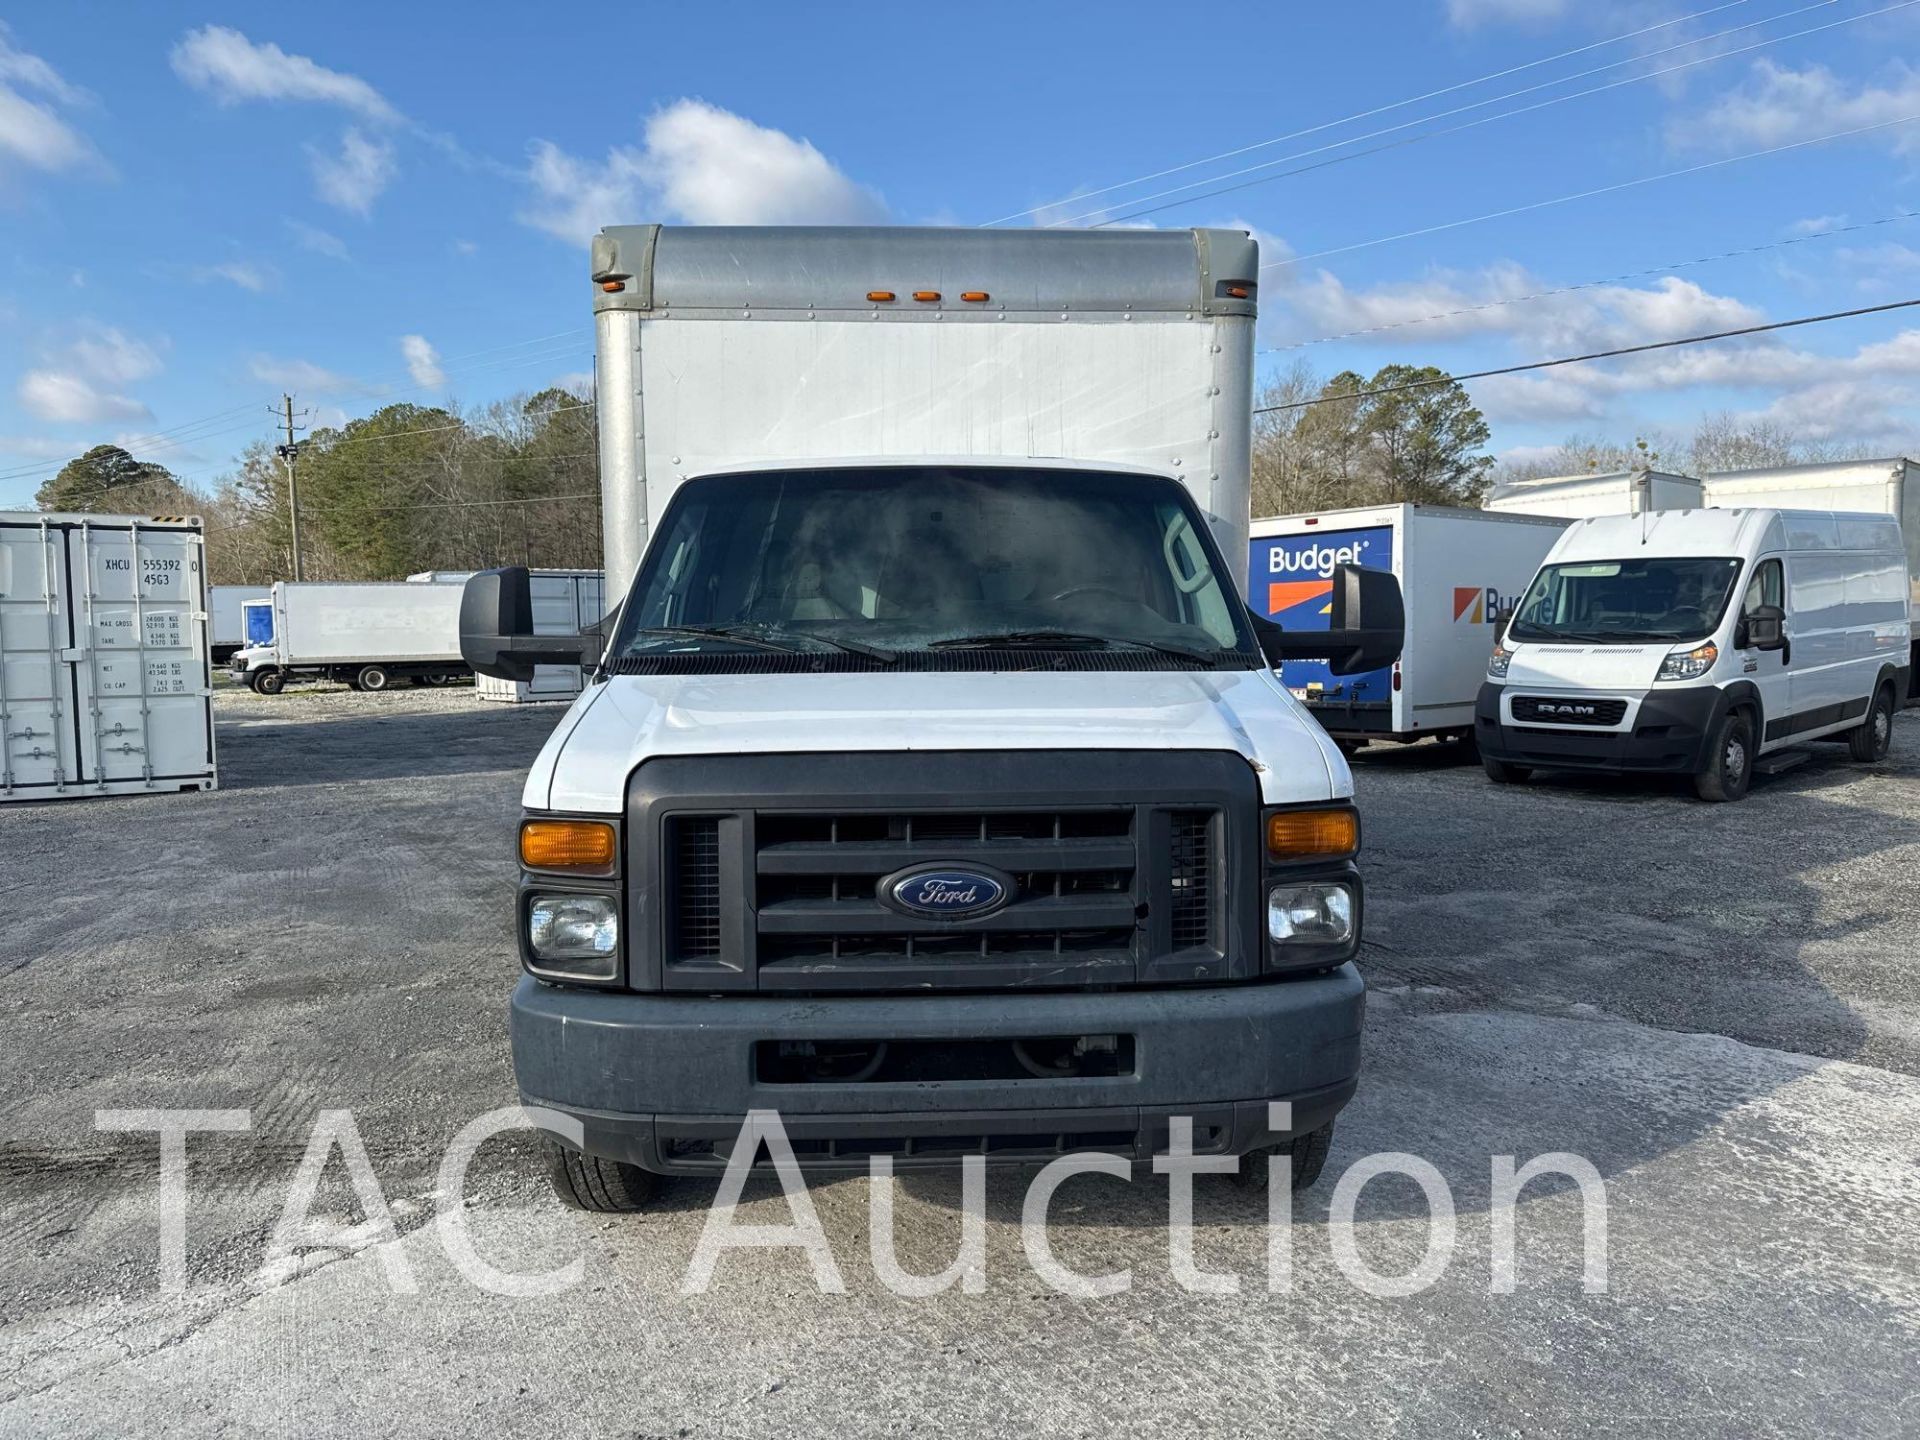 2016 Ford E-350 16ft Box Truck - Image 2 of 18